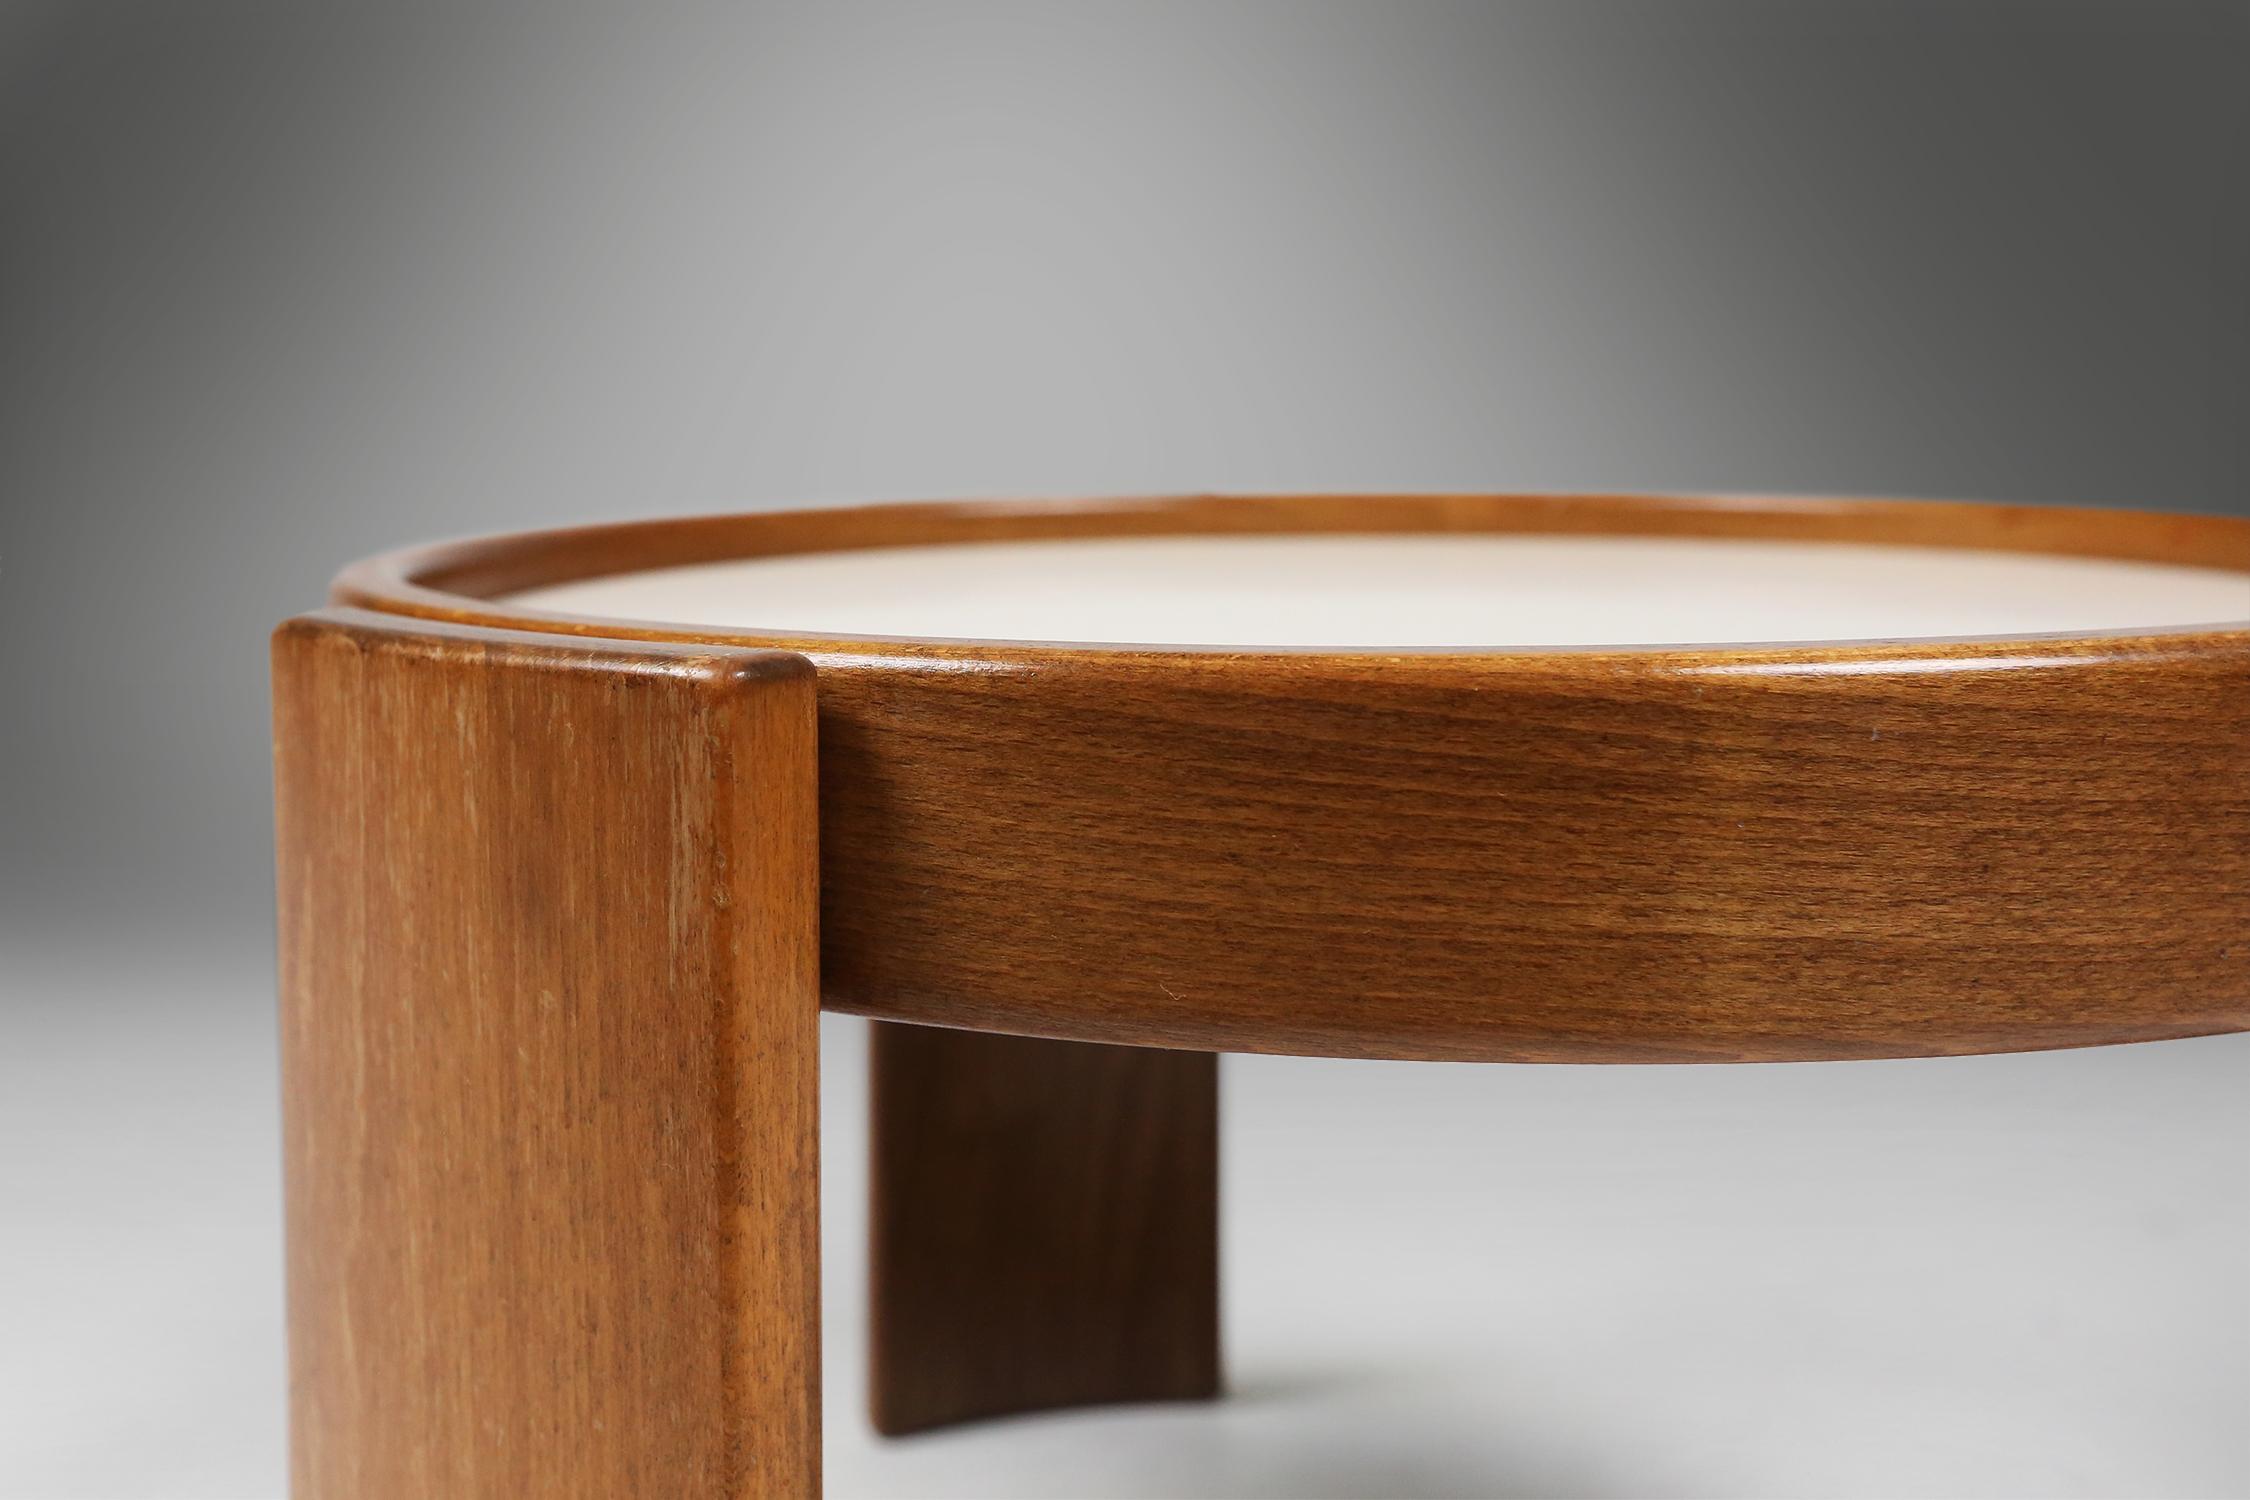 Gianfranco Frattini for Casina, Italy, 1966, early edition wooden nesting tables For Sale 2